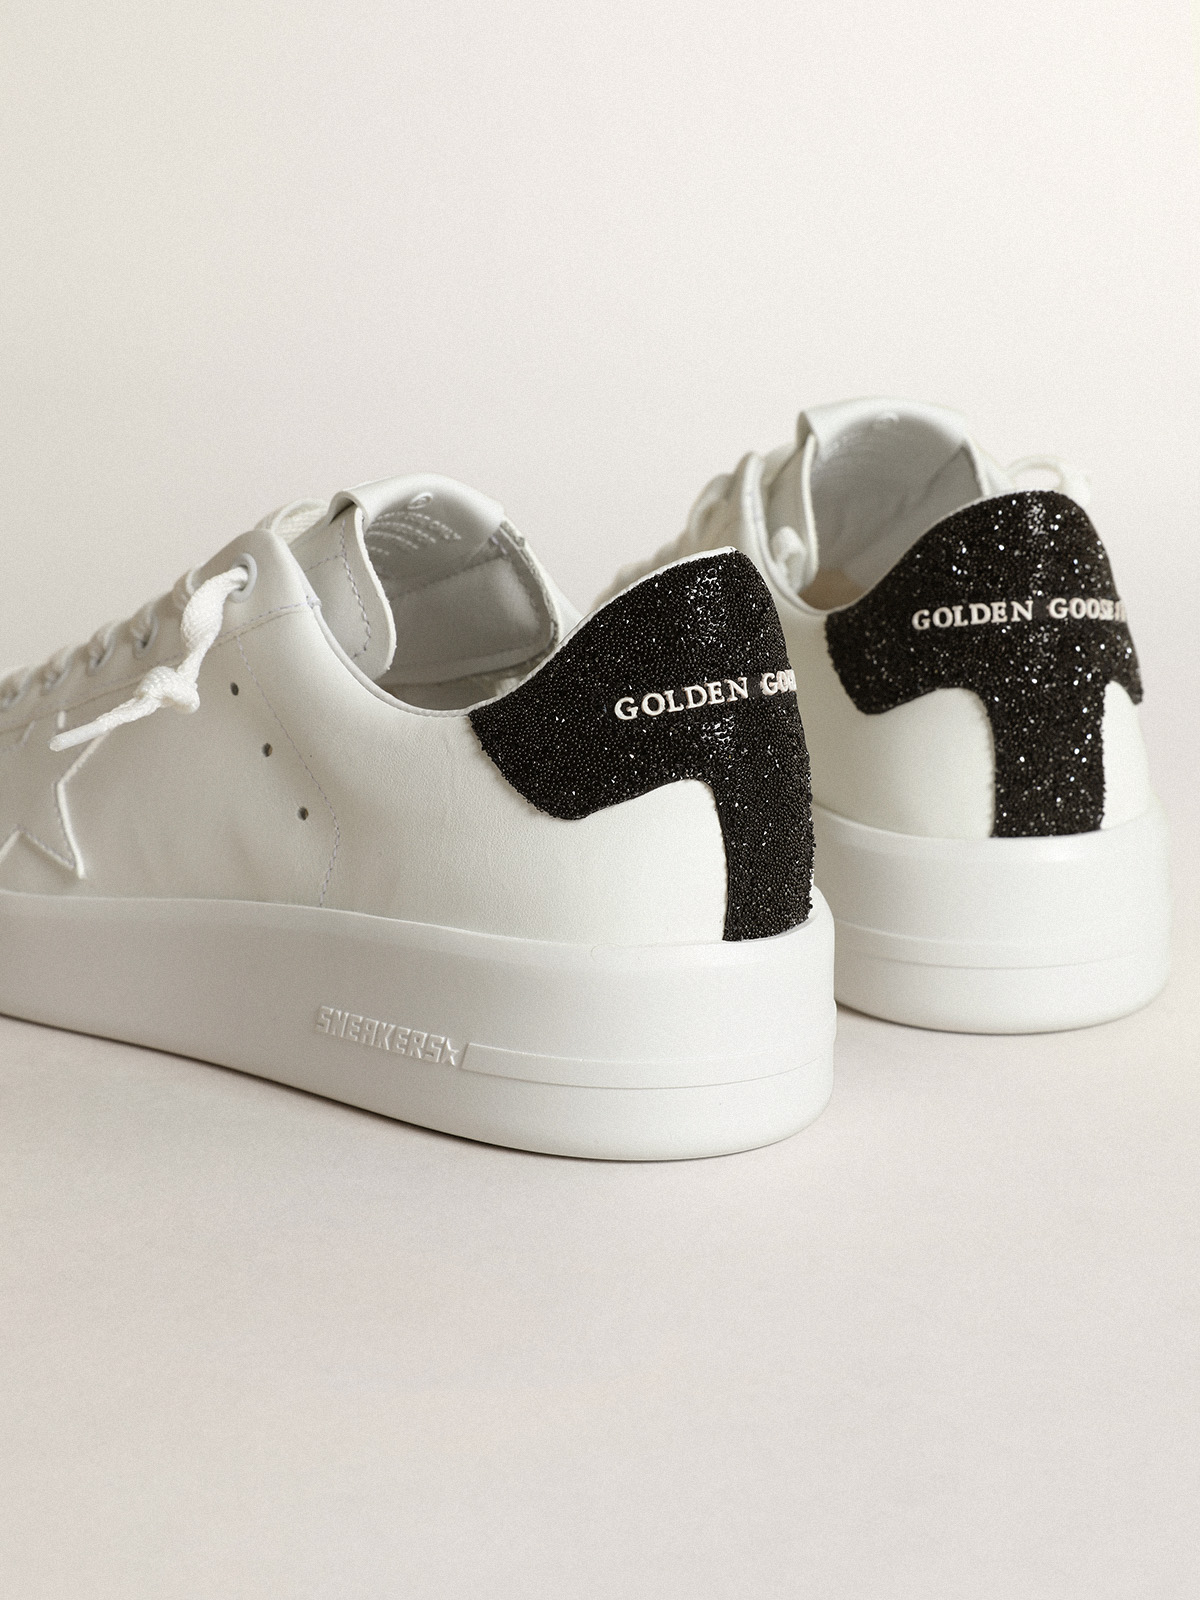 Purestar in white leather with tone-on-tone star and heel tab in black  Swarovski crystals | Golden Goose